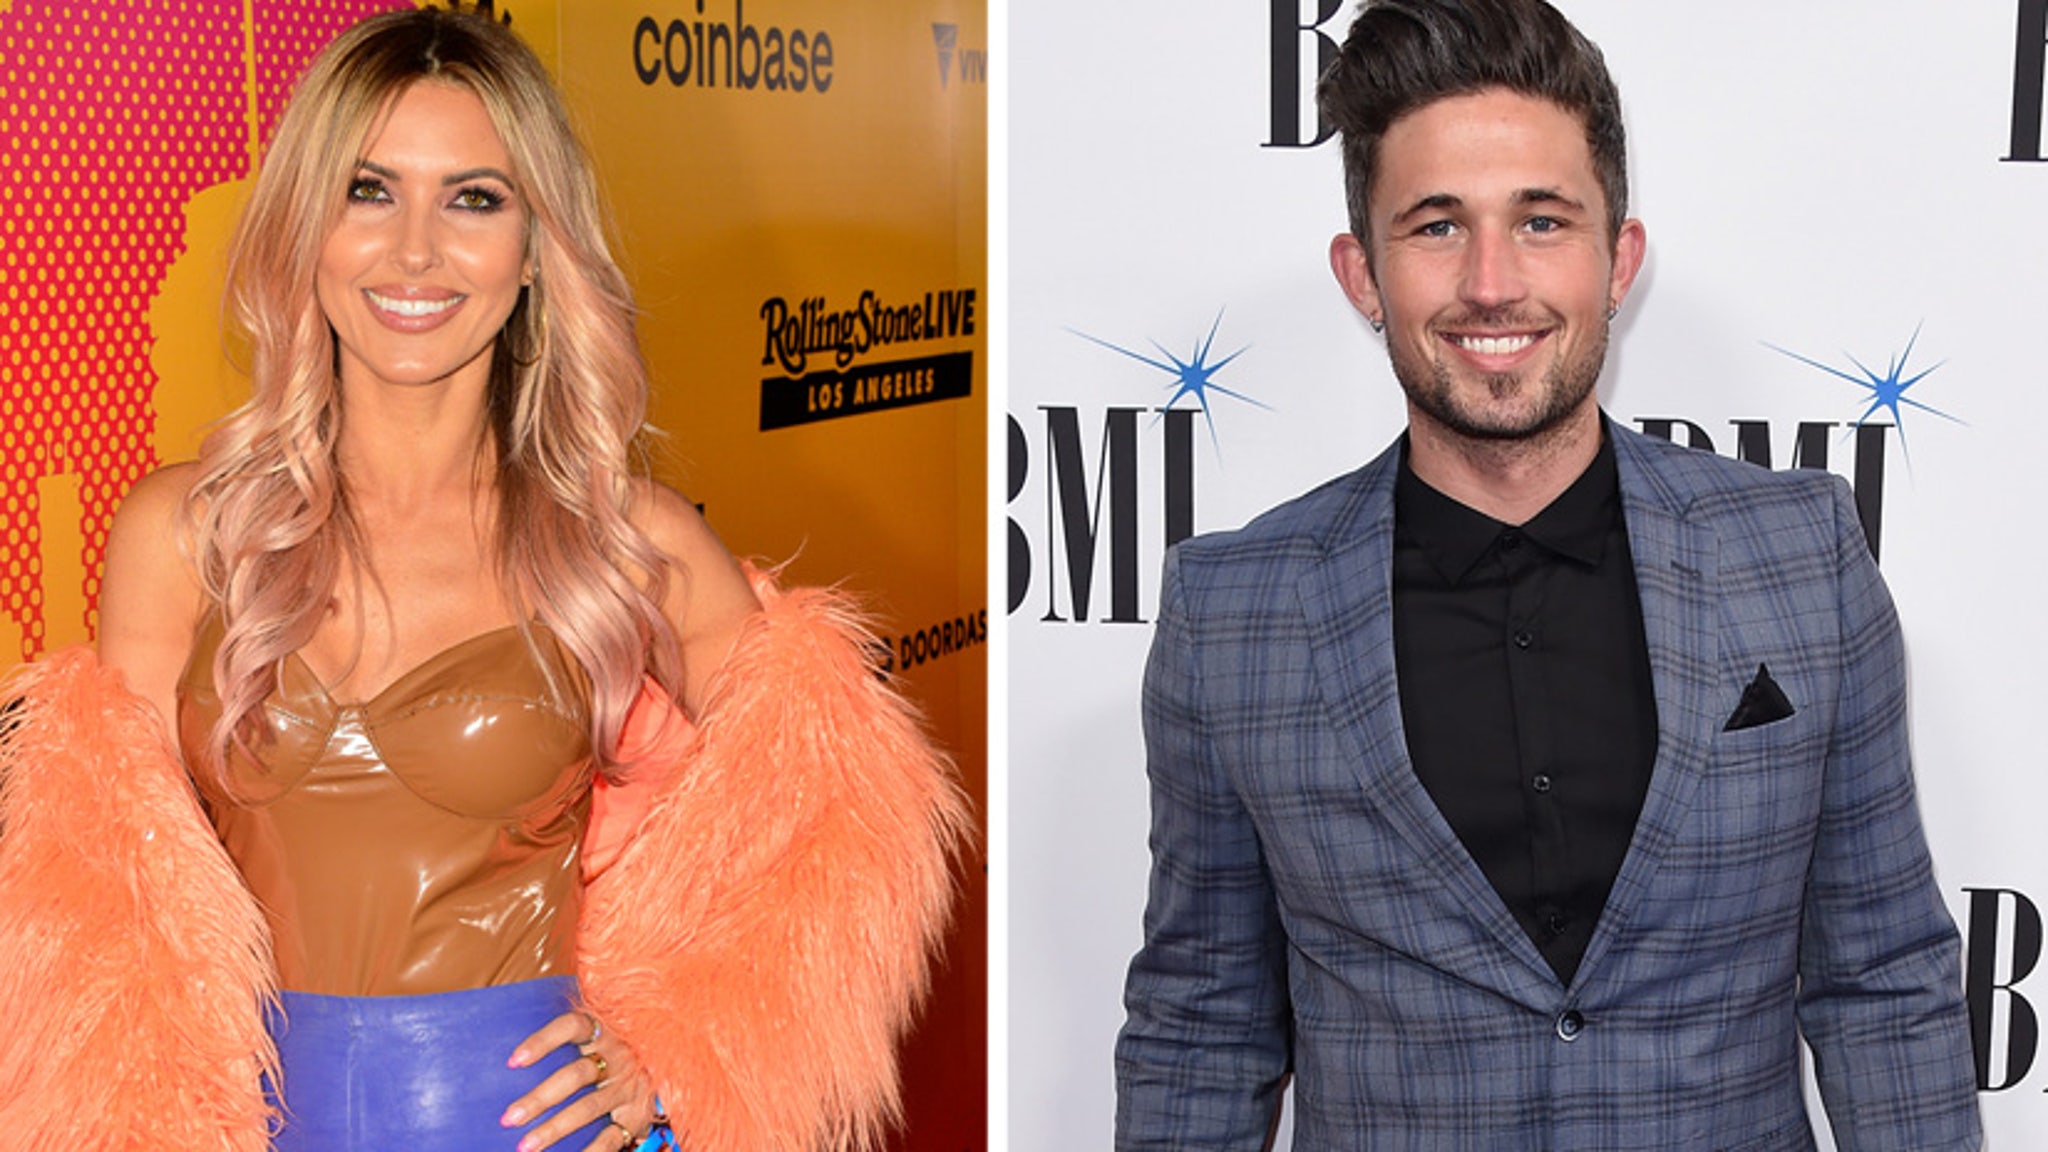 Audrina Patridge goes official on Instagram with her new boyfriend, country singer Michael Ray